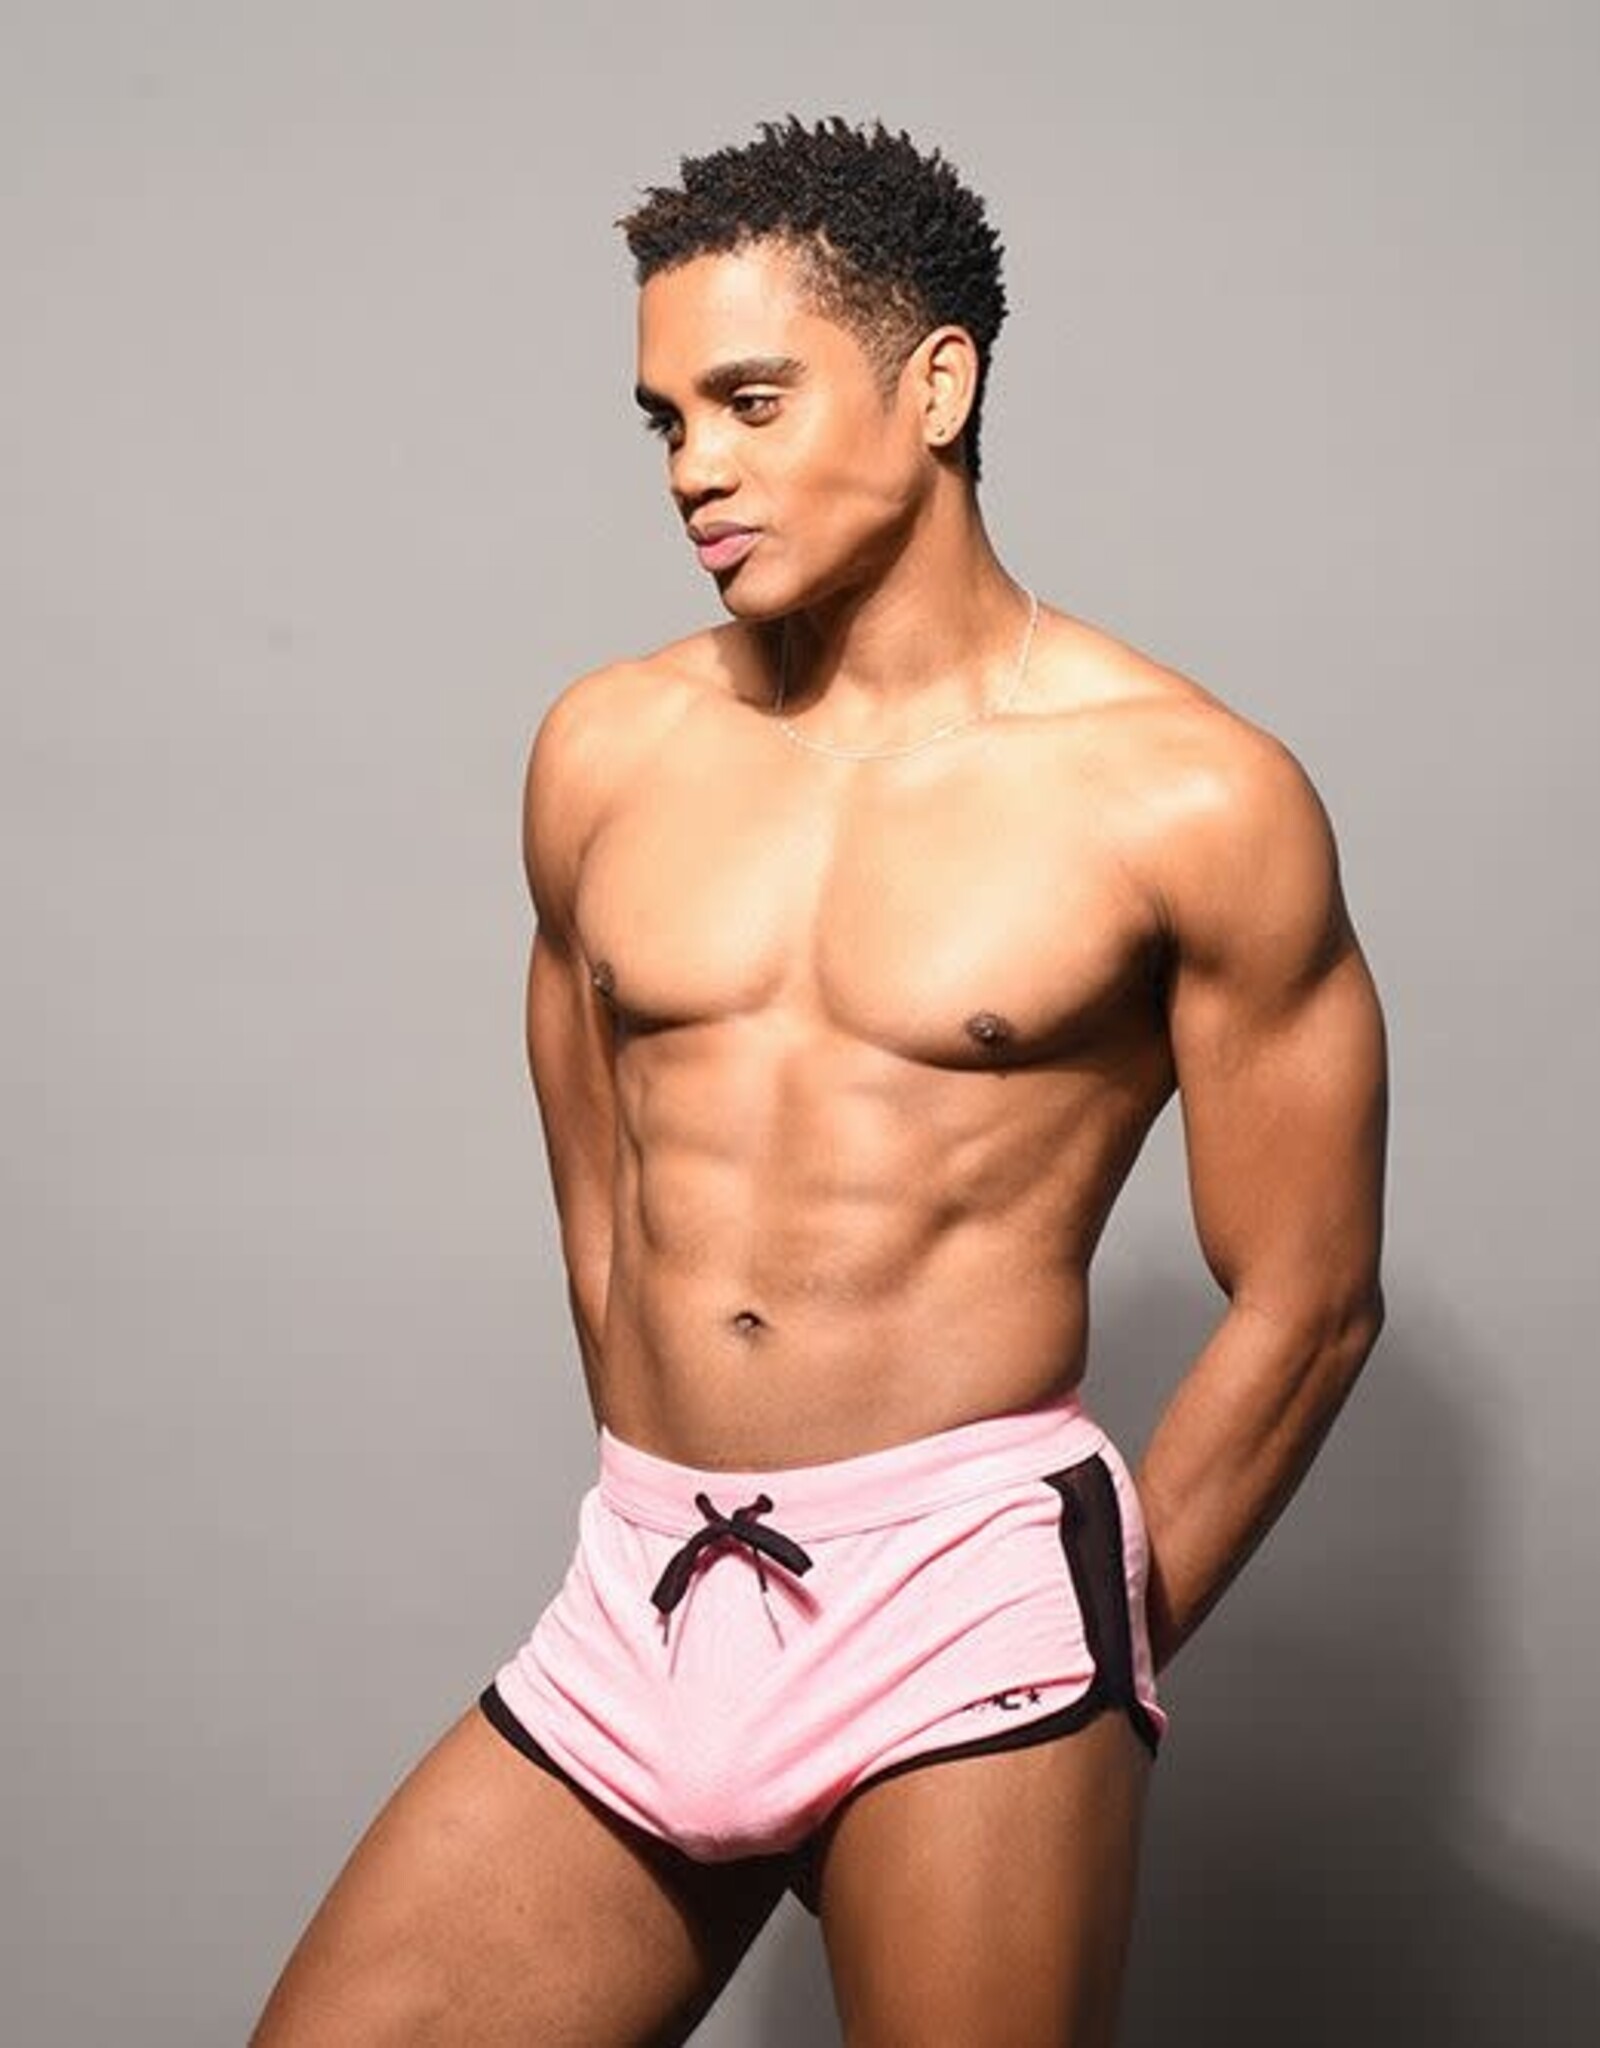 Andrew Christian Cotton Candy Shorts (in-store purchase only)